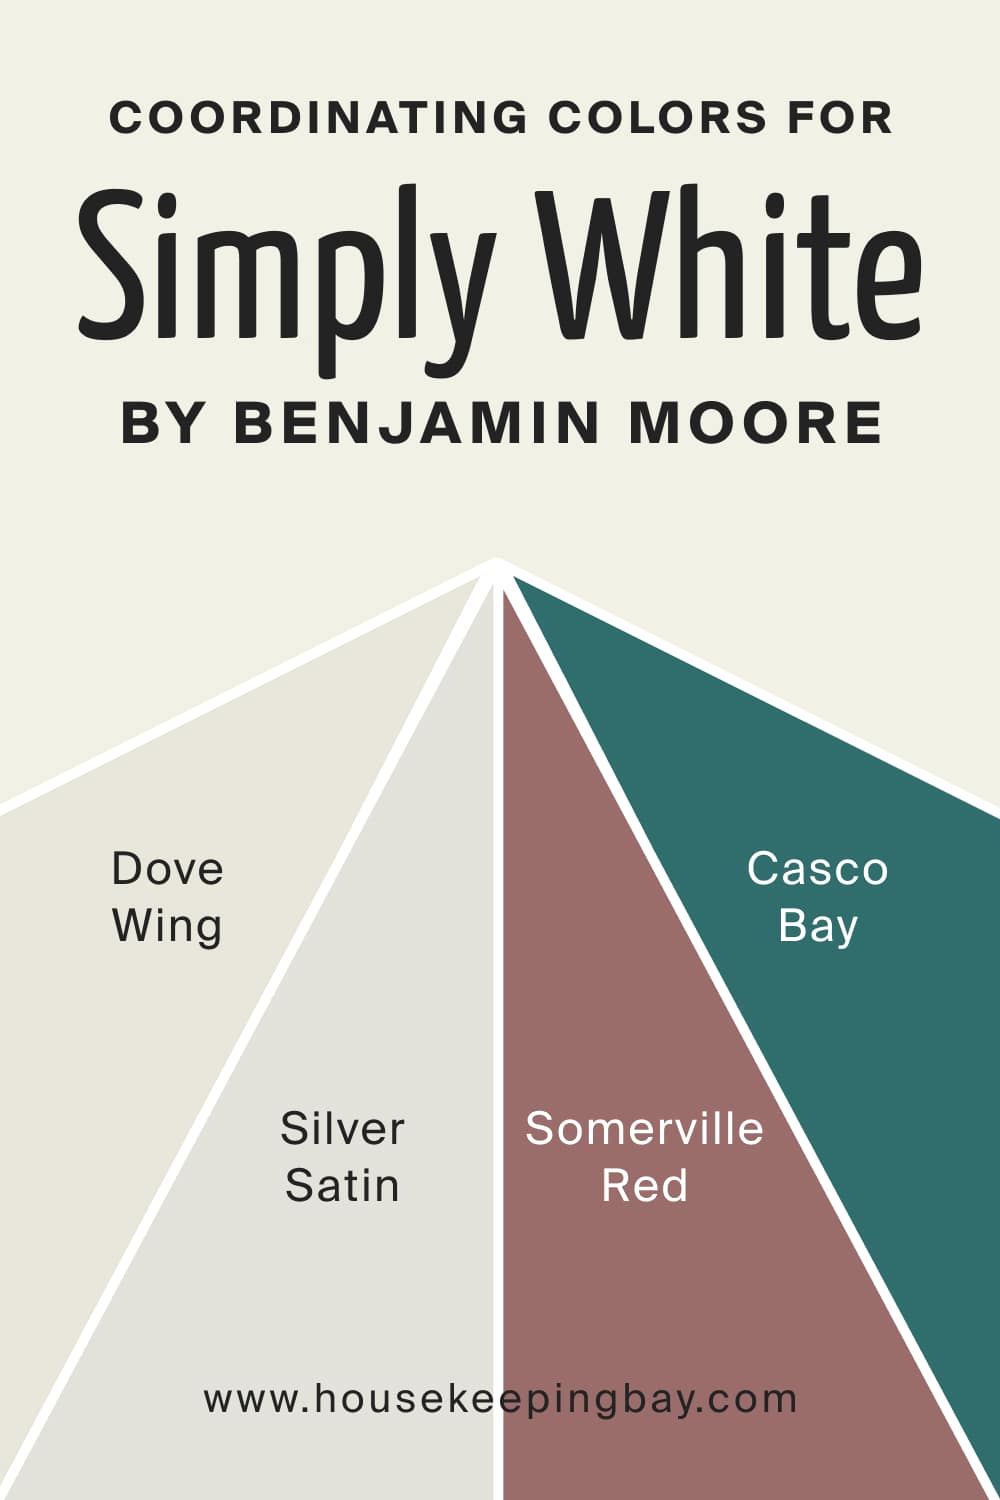 Coordinating Colors for Simply White by Benjamin Moore